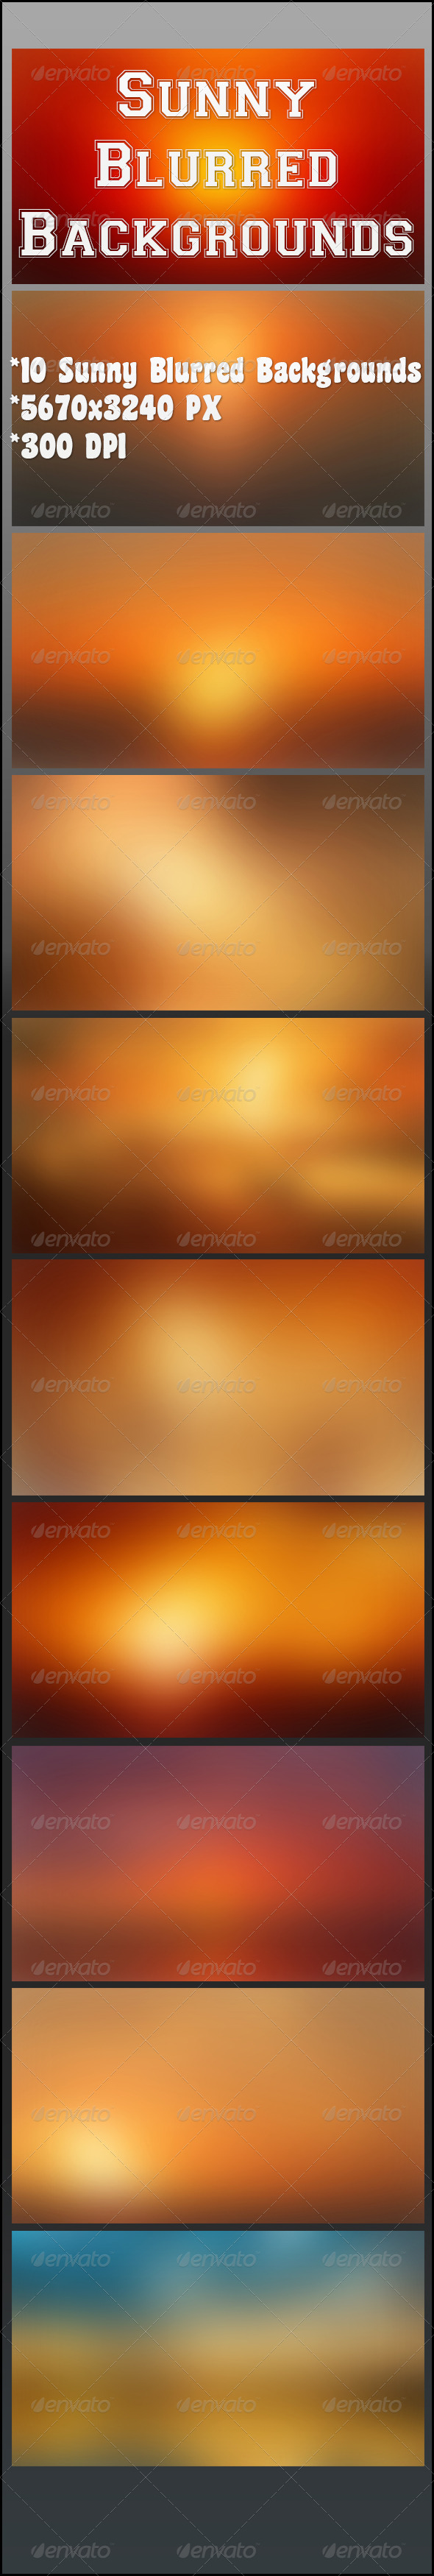 GraphicRiver Sunny Blurred Backgrounds 6940385